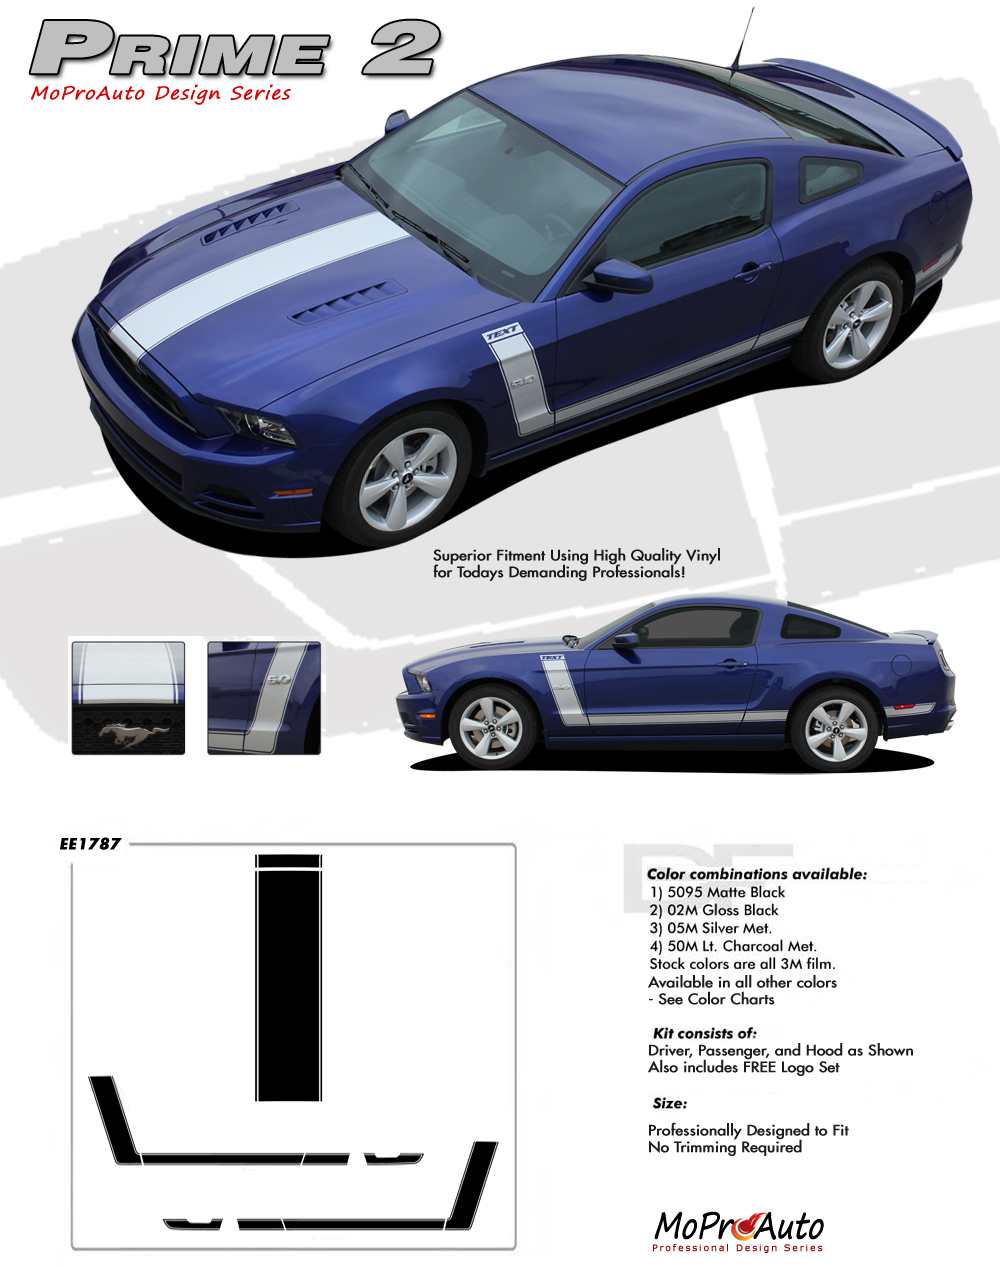 PRIME 2 Ford Mustang - MoProAuto Pro Design Series Vinyl Graphics, Stripes and Decals Kit